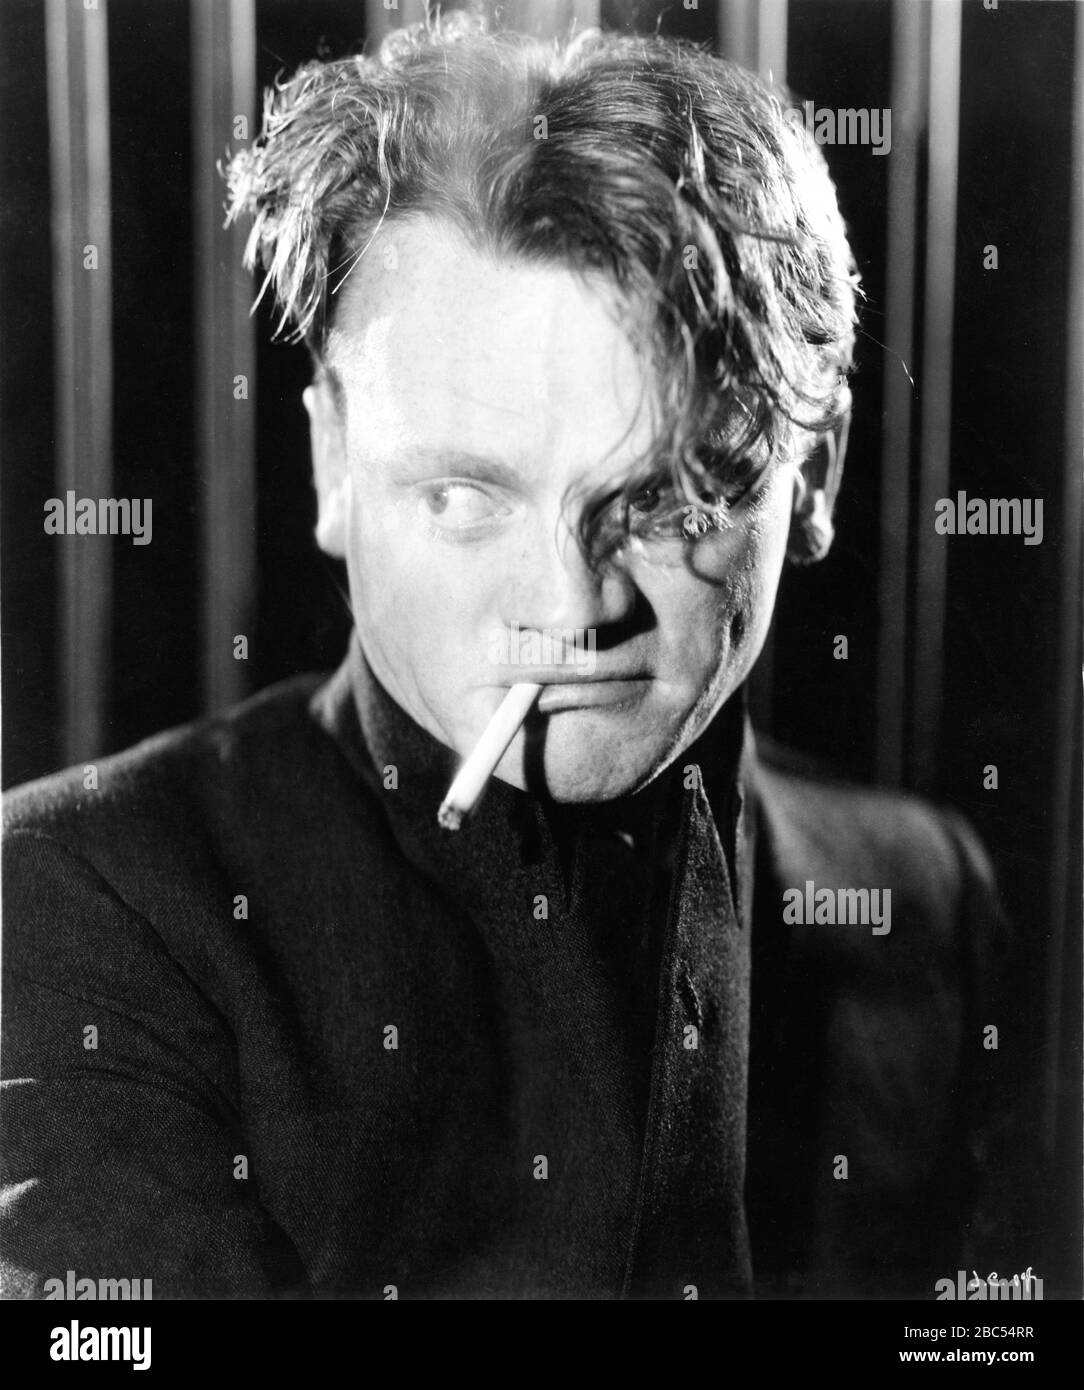 JAMES CAGNEY Portrait as Tom Powers in THE PUBLIC ENEMY / ENEMIES OF THE PUBLIC (UK original release title) 1931 director WILLIAM A. WELLMAN novel KUBEC GLASMON and JOHN BRIGHT Warner Bros. Stock Photo